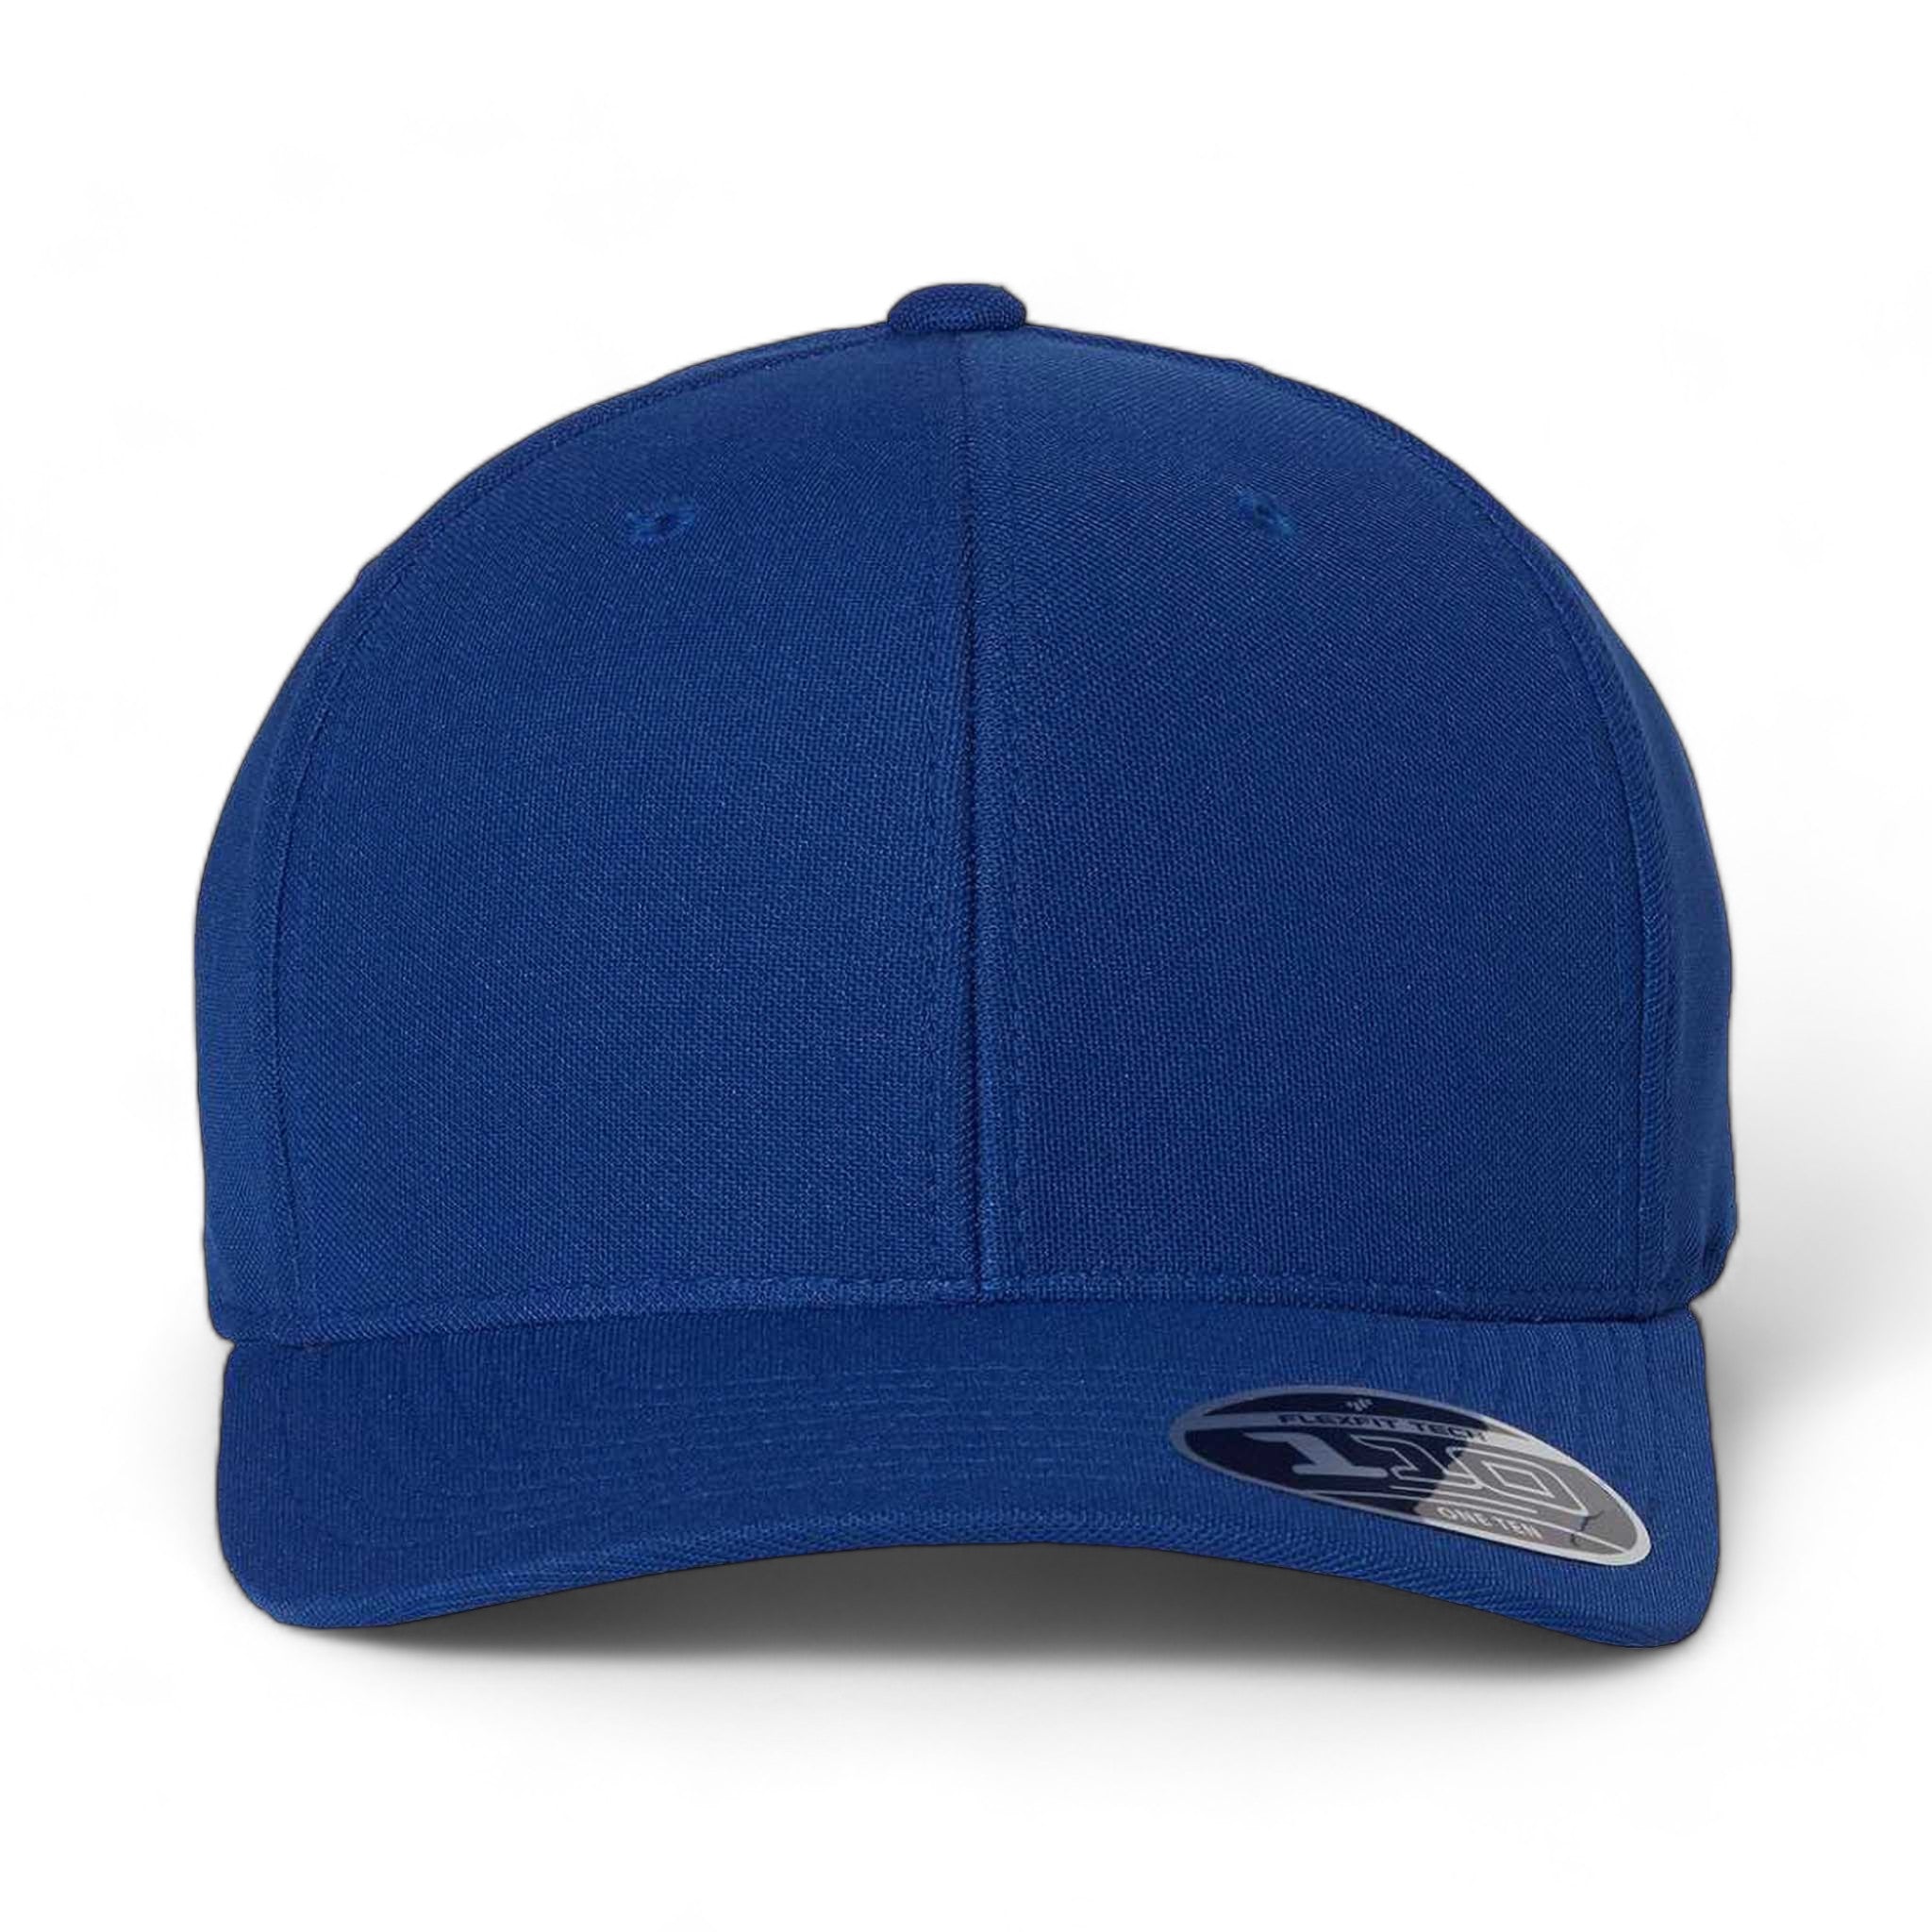 Front view of Flexfit 110P custom hat in royal blue